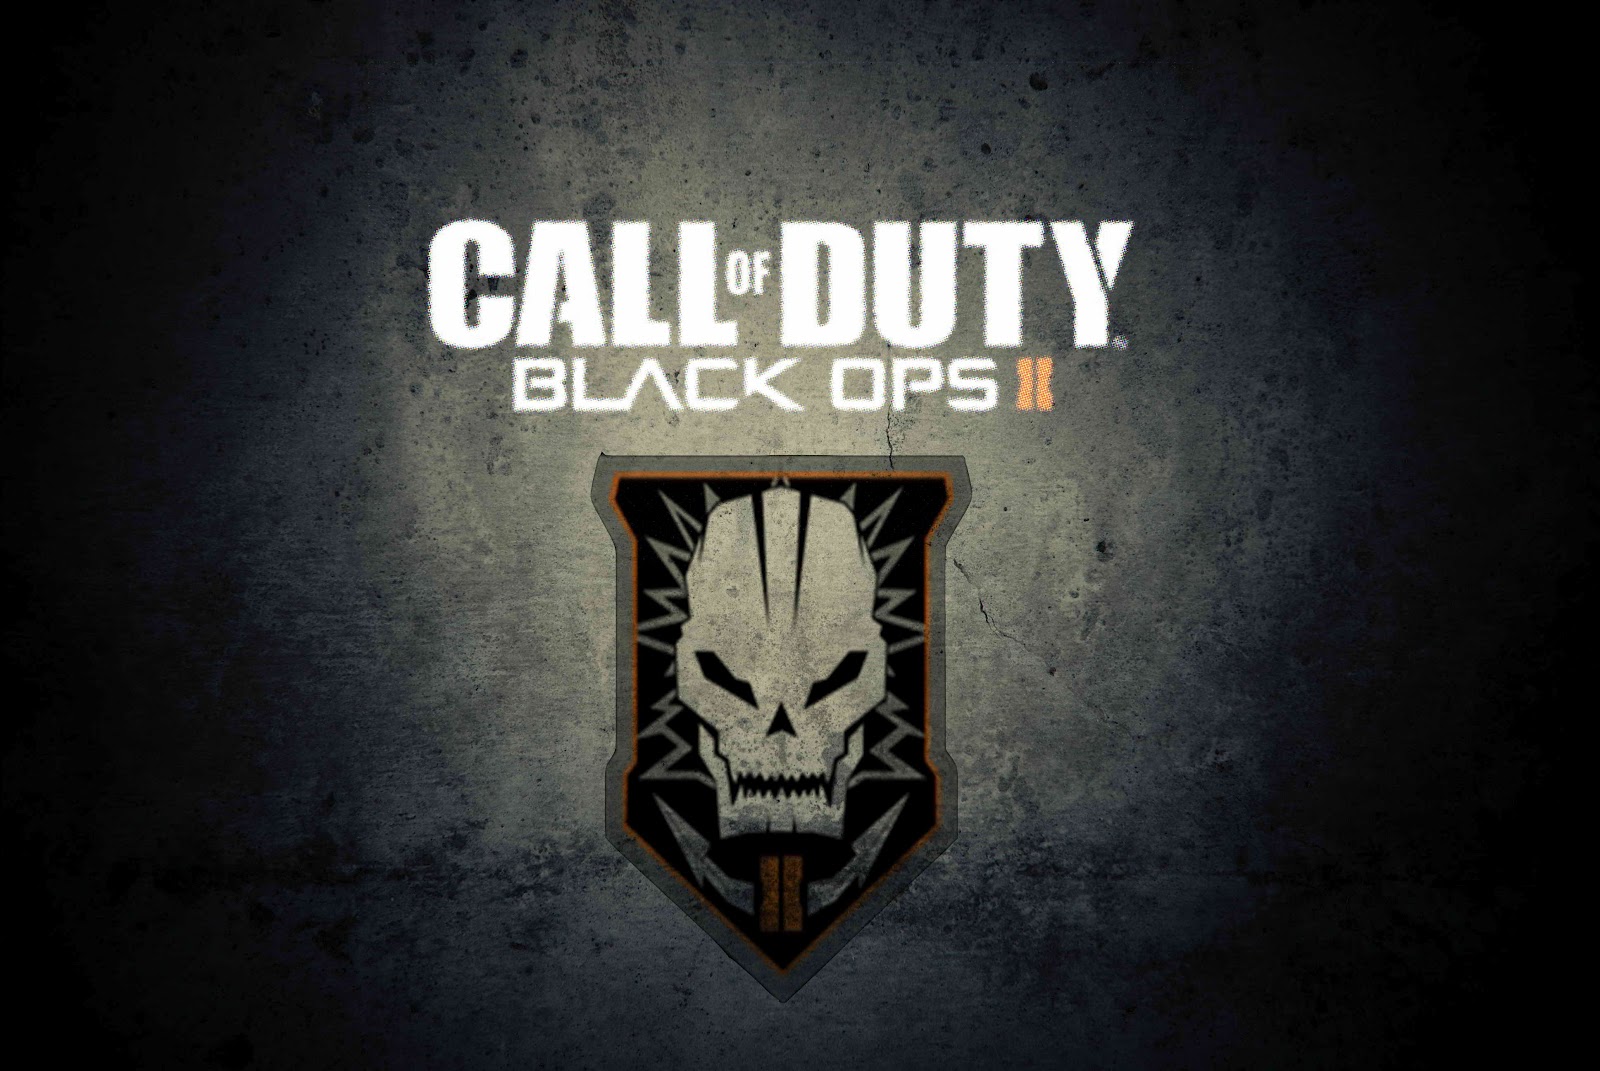 HD WALLPAPERS Call of Duty Black ops 2 HD Wallpapers 1600x1071